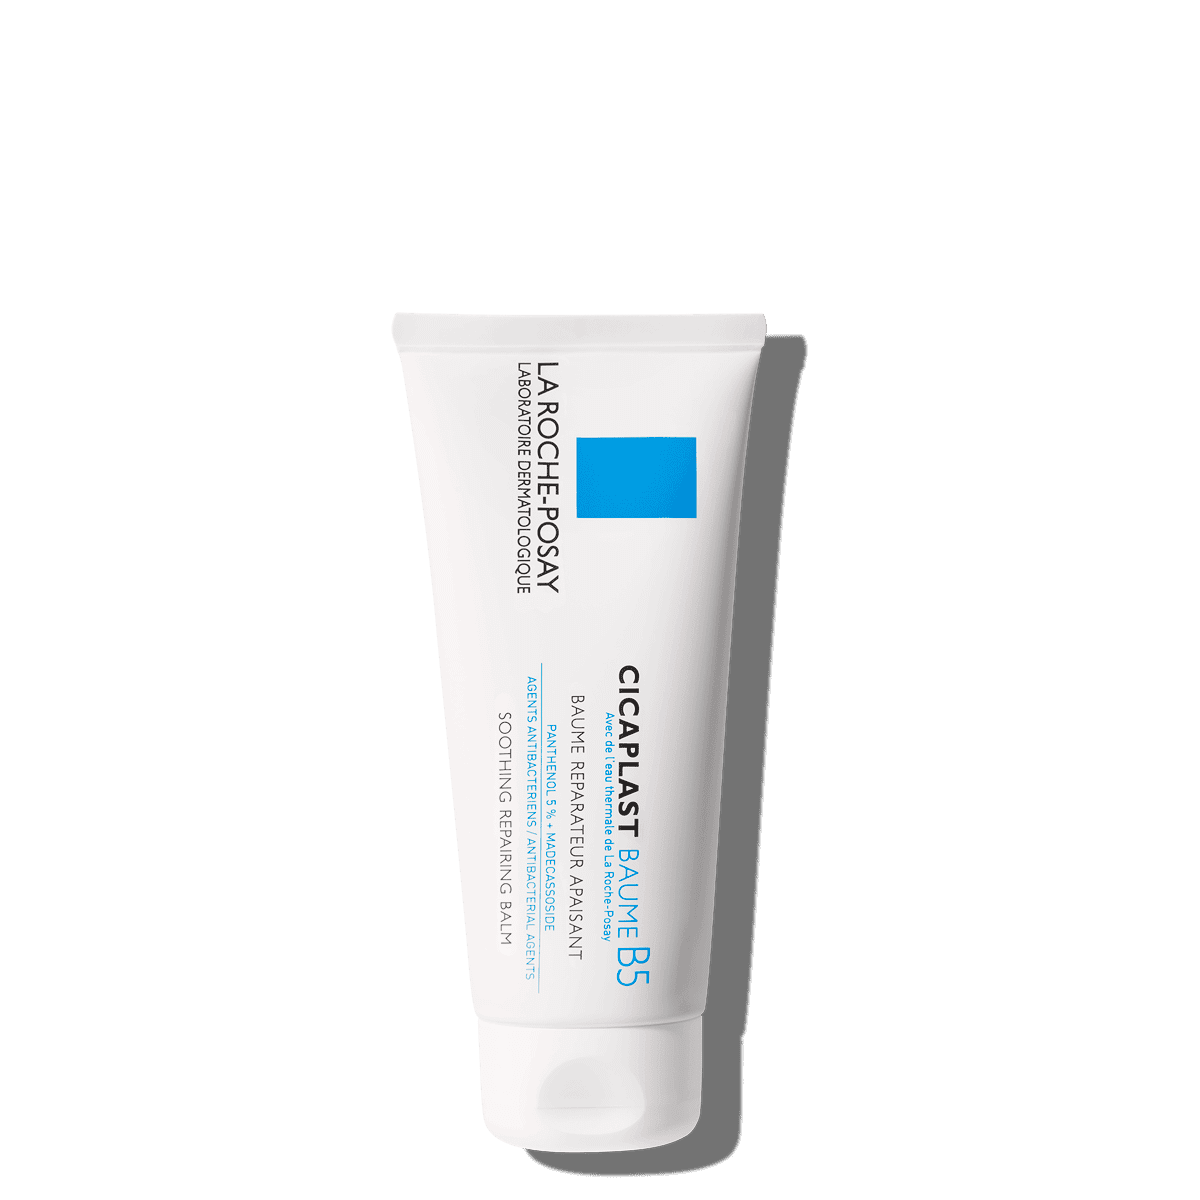 La Roche Posay Cicaplast Baume B5 Soothing Repairing Balm | Review Marsha Beauty